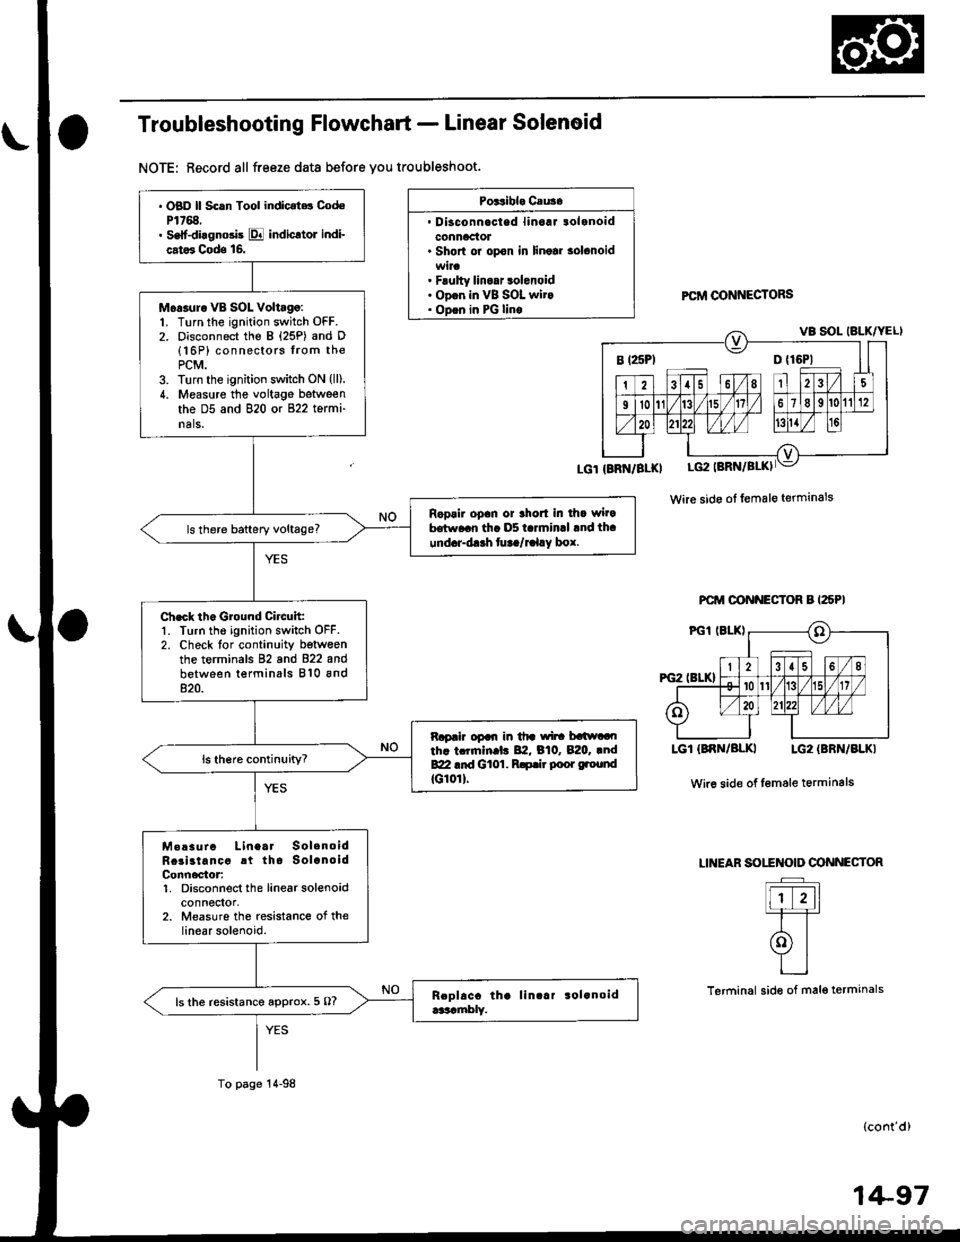 HONDA CIVIC 1998 6.G Owners Manual Troubleshooting Flowchart - Linear Solenoid
NOTE: Record all freeze data before you troubleshoot.
Poitibl. Cau3.
. Disconnacted linoaJ tolanoidconnaclol. Shorl or opon in linolr solonoid
. Flulty lino